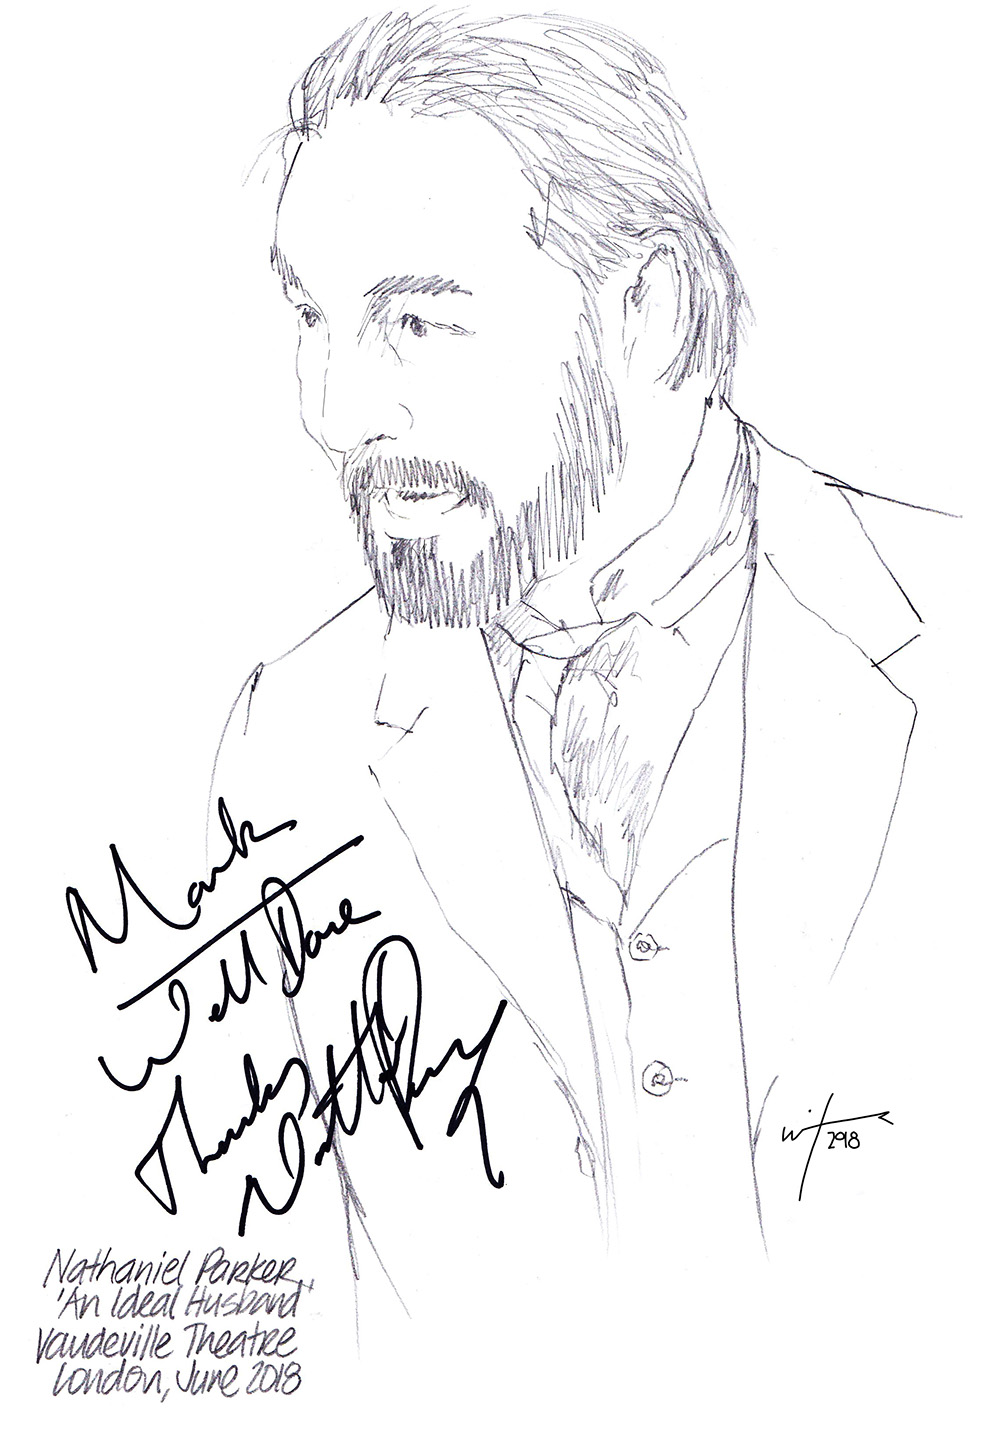 Autographed drawing of Nathaniel Parker in An Ideal Husband at the Vaudeville Theatre on London's West End